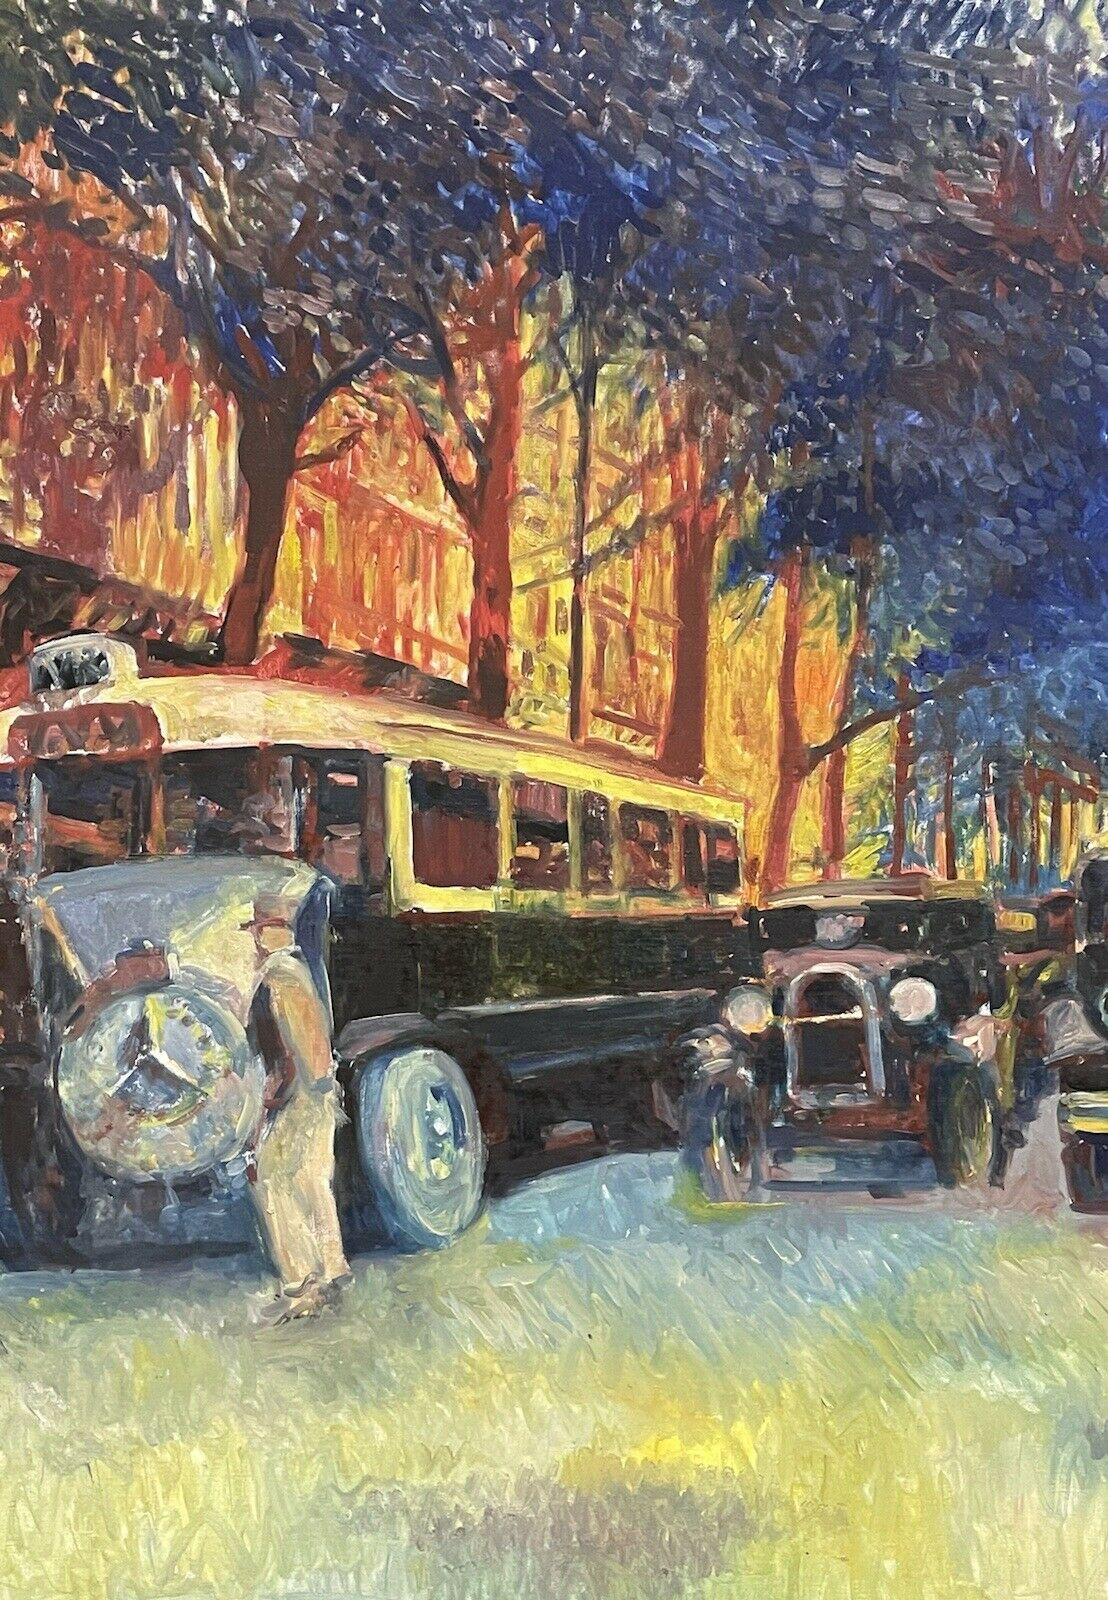 Artist/ School: by Patrice Landauer (French b. 1962), signed lower right.

Title: Vintage Parisian Street scene

Medium:  oil painting, canvas, unframed

Size: painting: 35 x 51 inches
        
Provenance: private collection of this artists work,